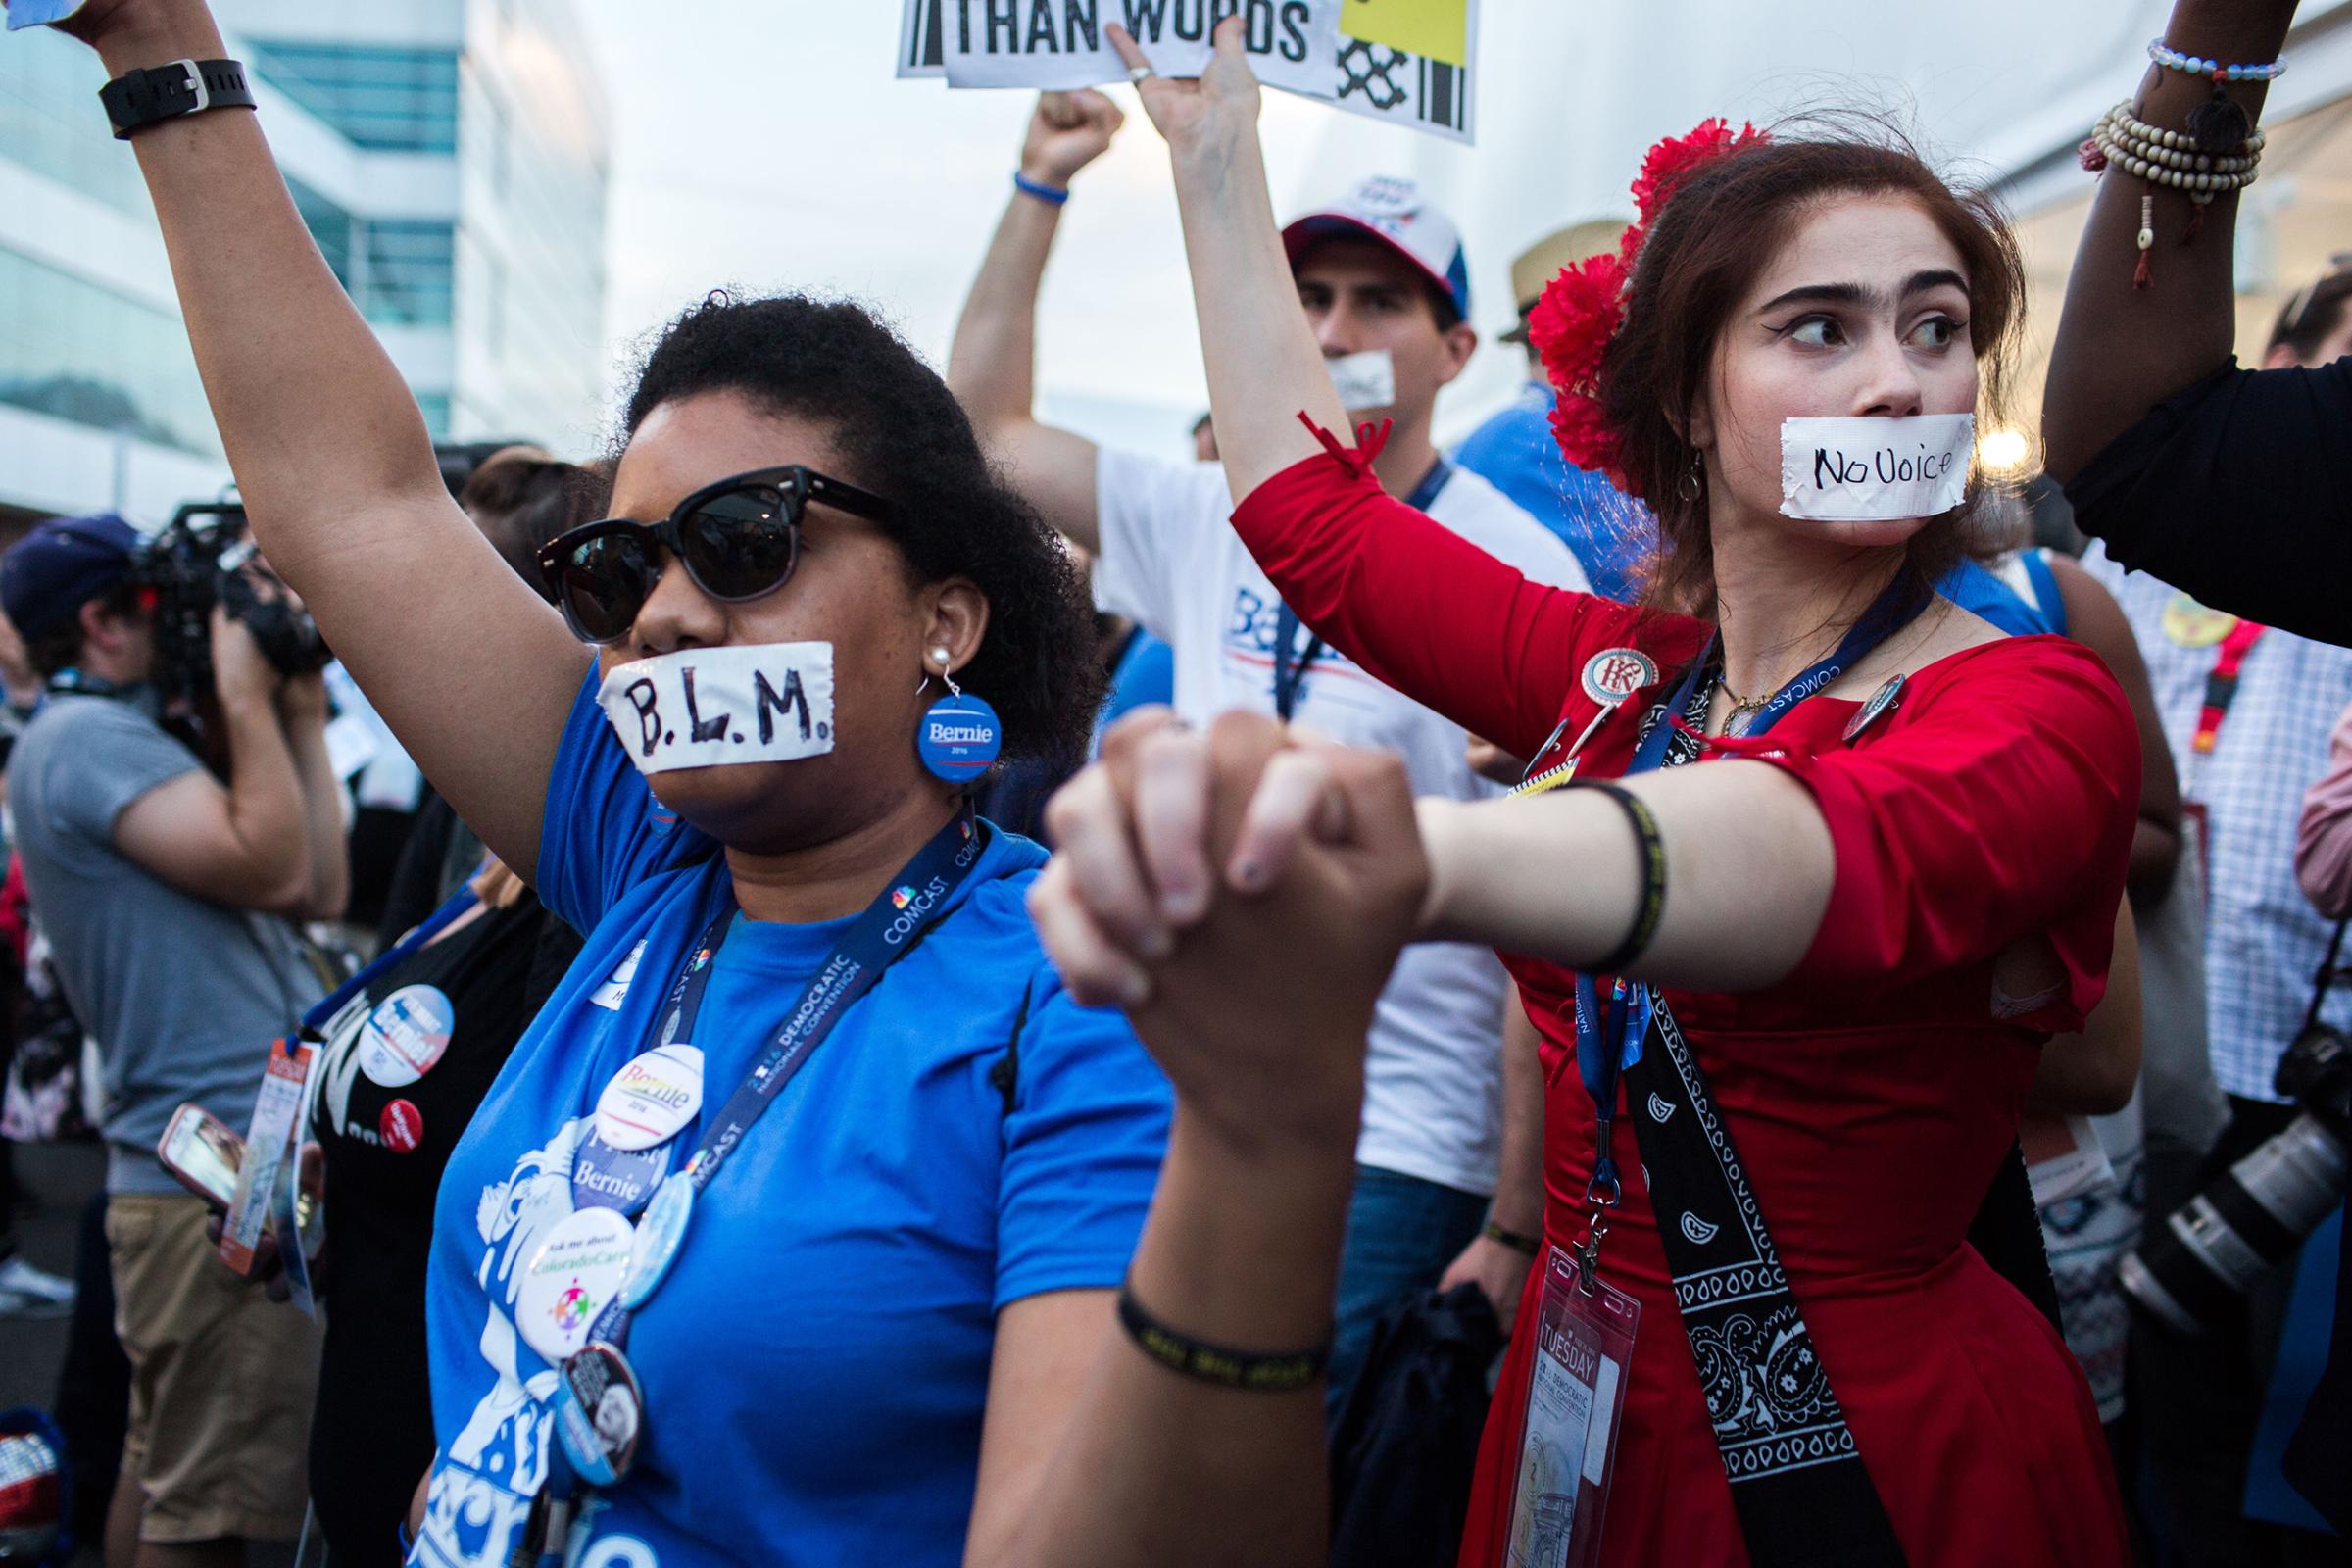 Protesters and pro Bernie delegates held a demonstration at the media tent at the Democratic National Convention at the Wells Fargo Center on July 26, 2016 in Philadelphia.(Natalie Keyssar for TIME)